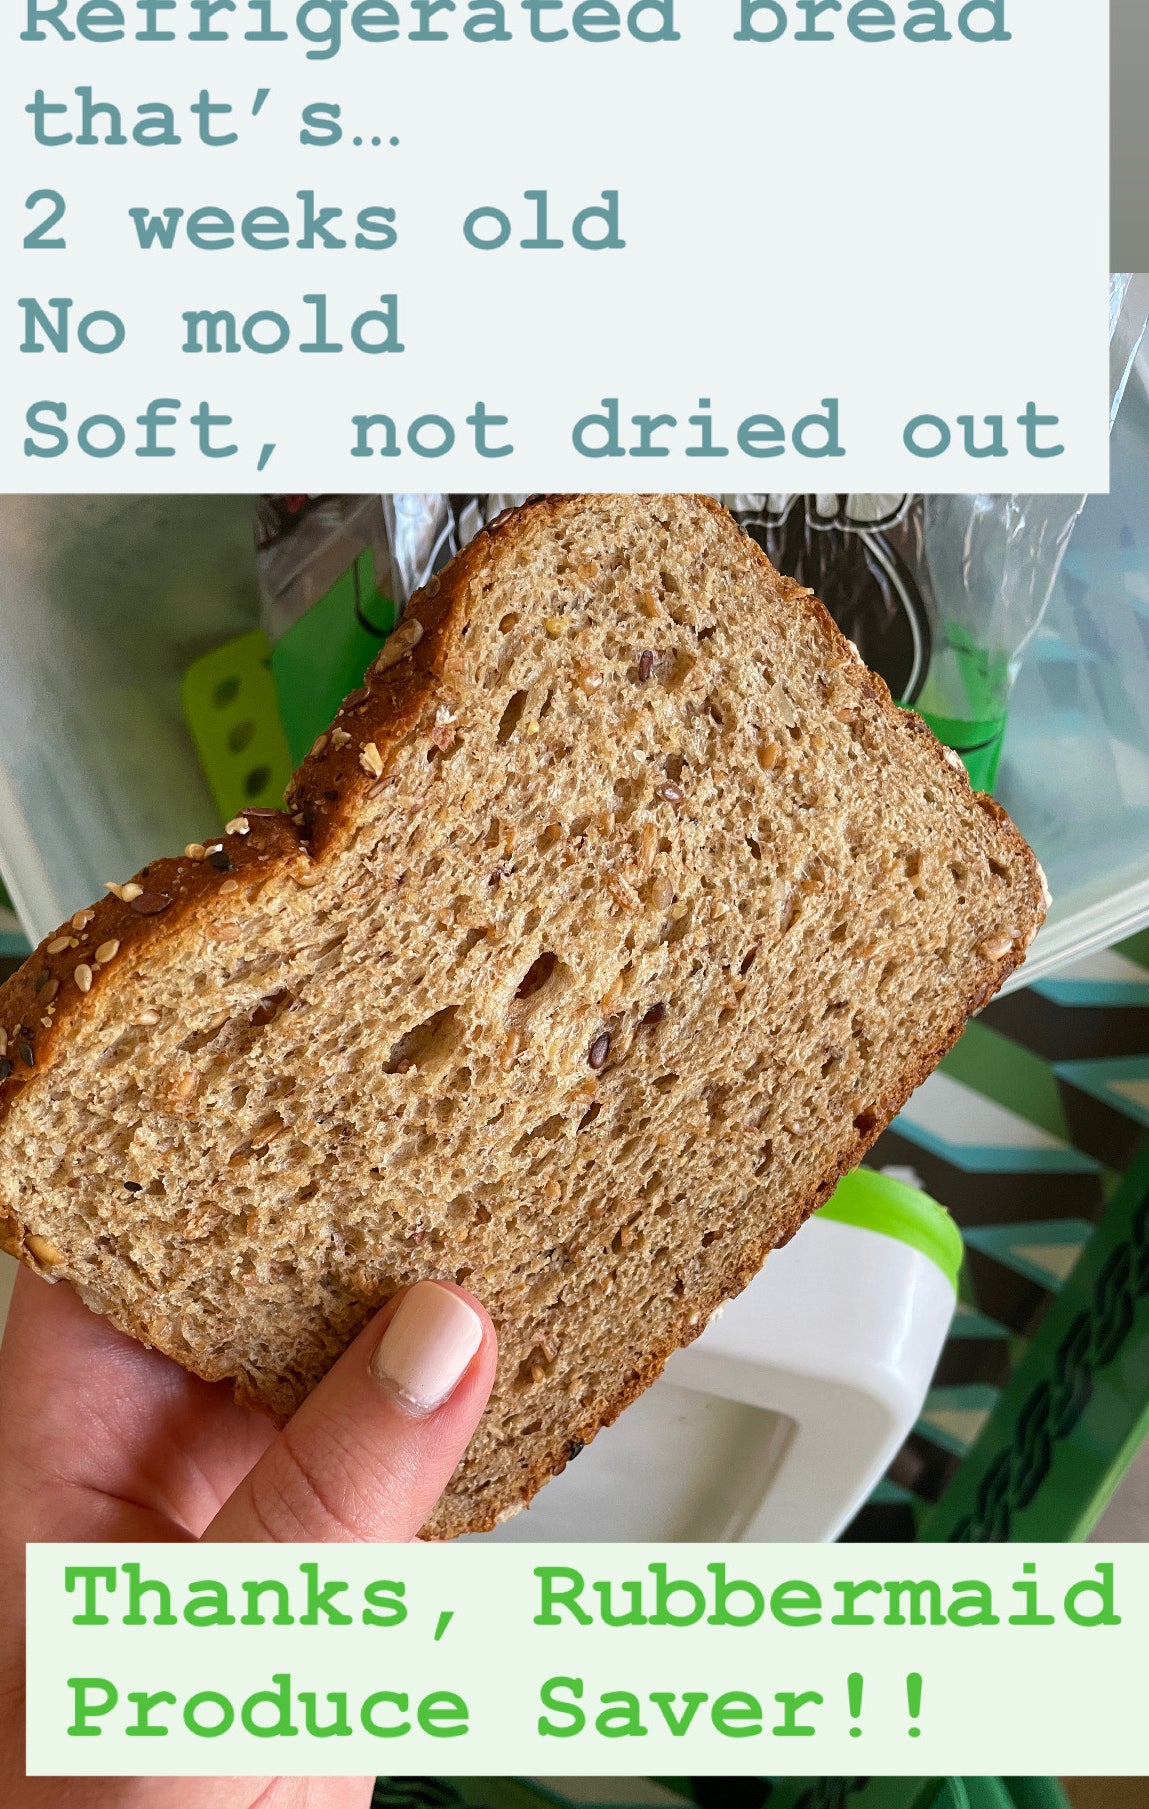 Refrigerated bread that’s 2 weeks old, no mold, soft, not dried out. Thanks, Rubbermaid Produce Saver